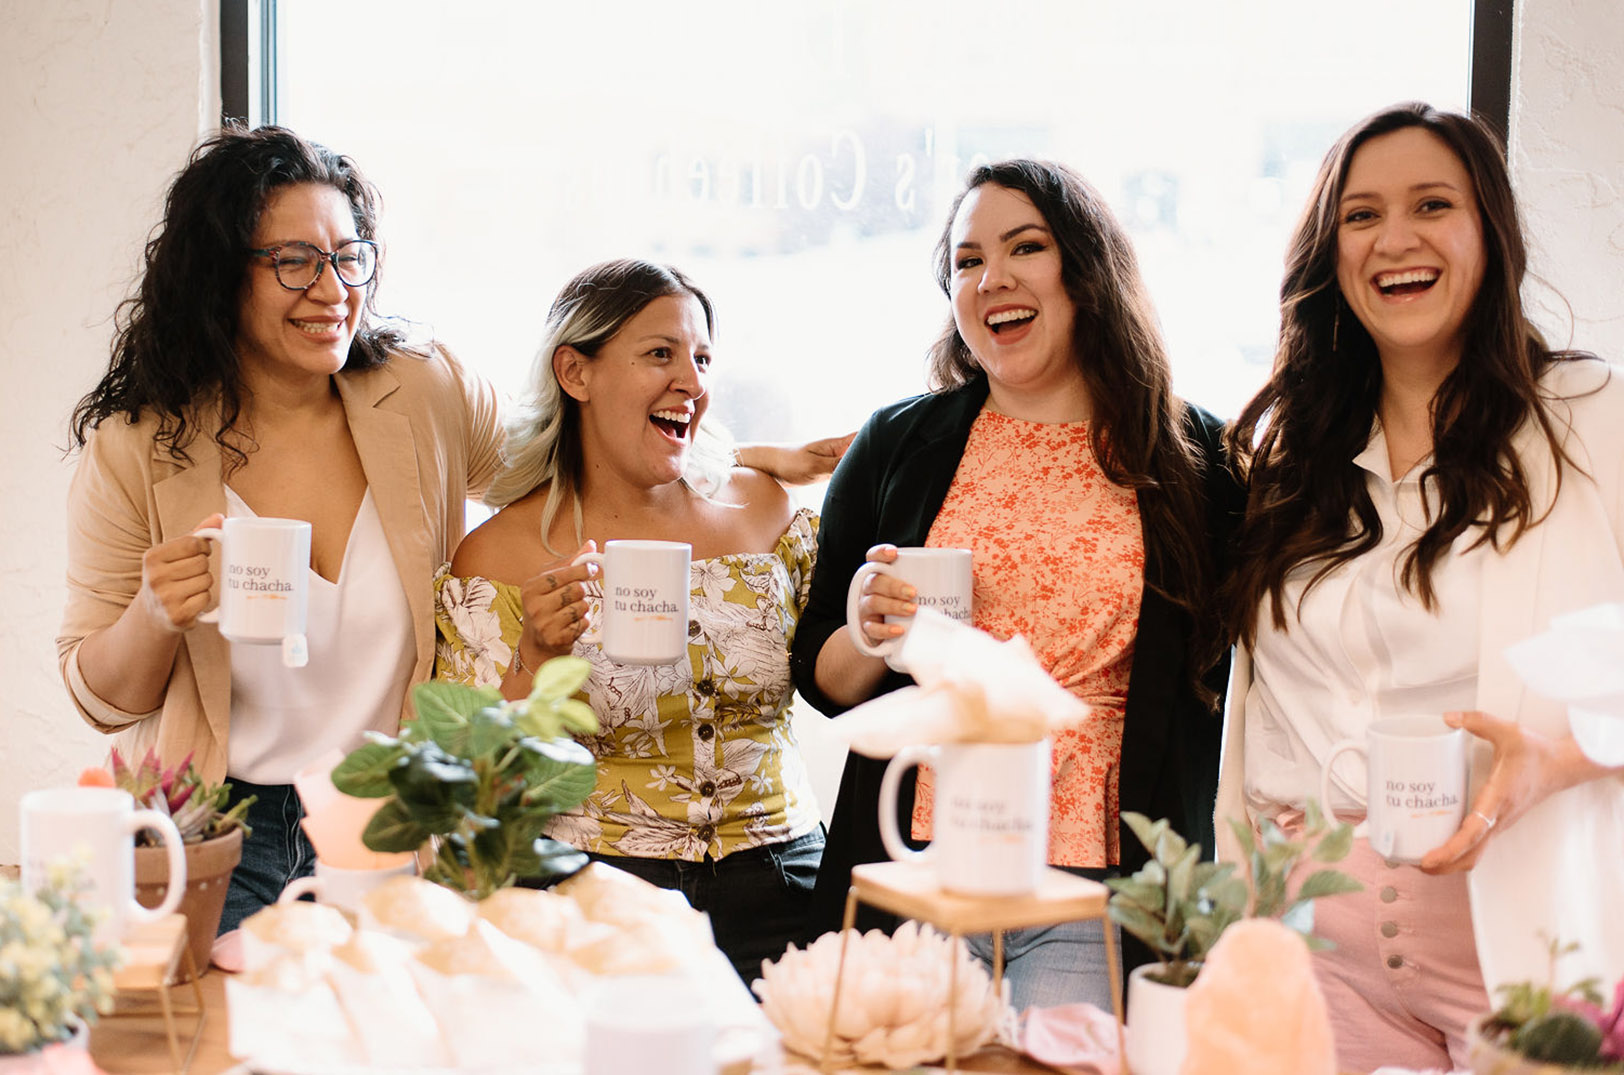 No soy tu chacha: How four Latinx moms (and 600+ of their closest friends) are cleaning up gender roles